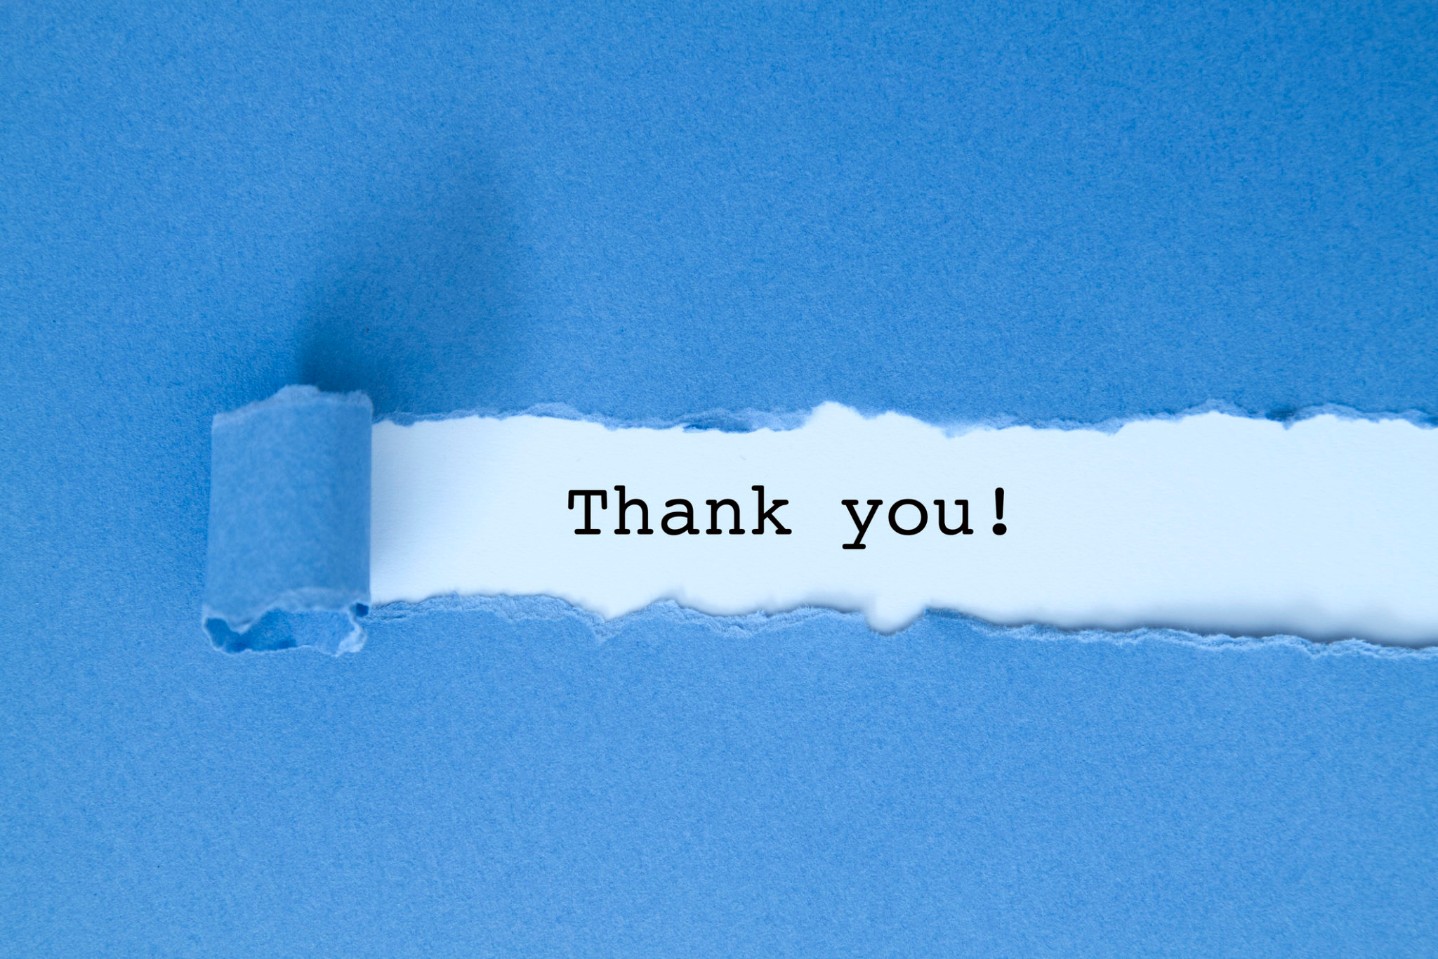 Thank you message under blue torn paper.